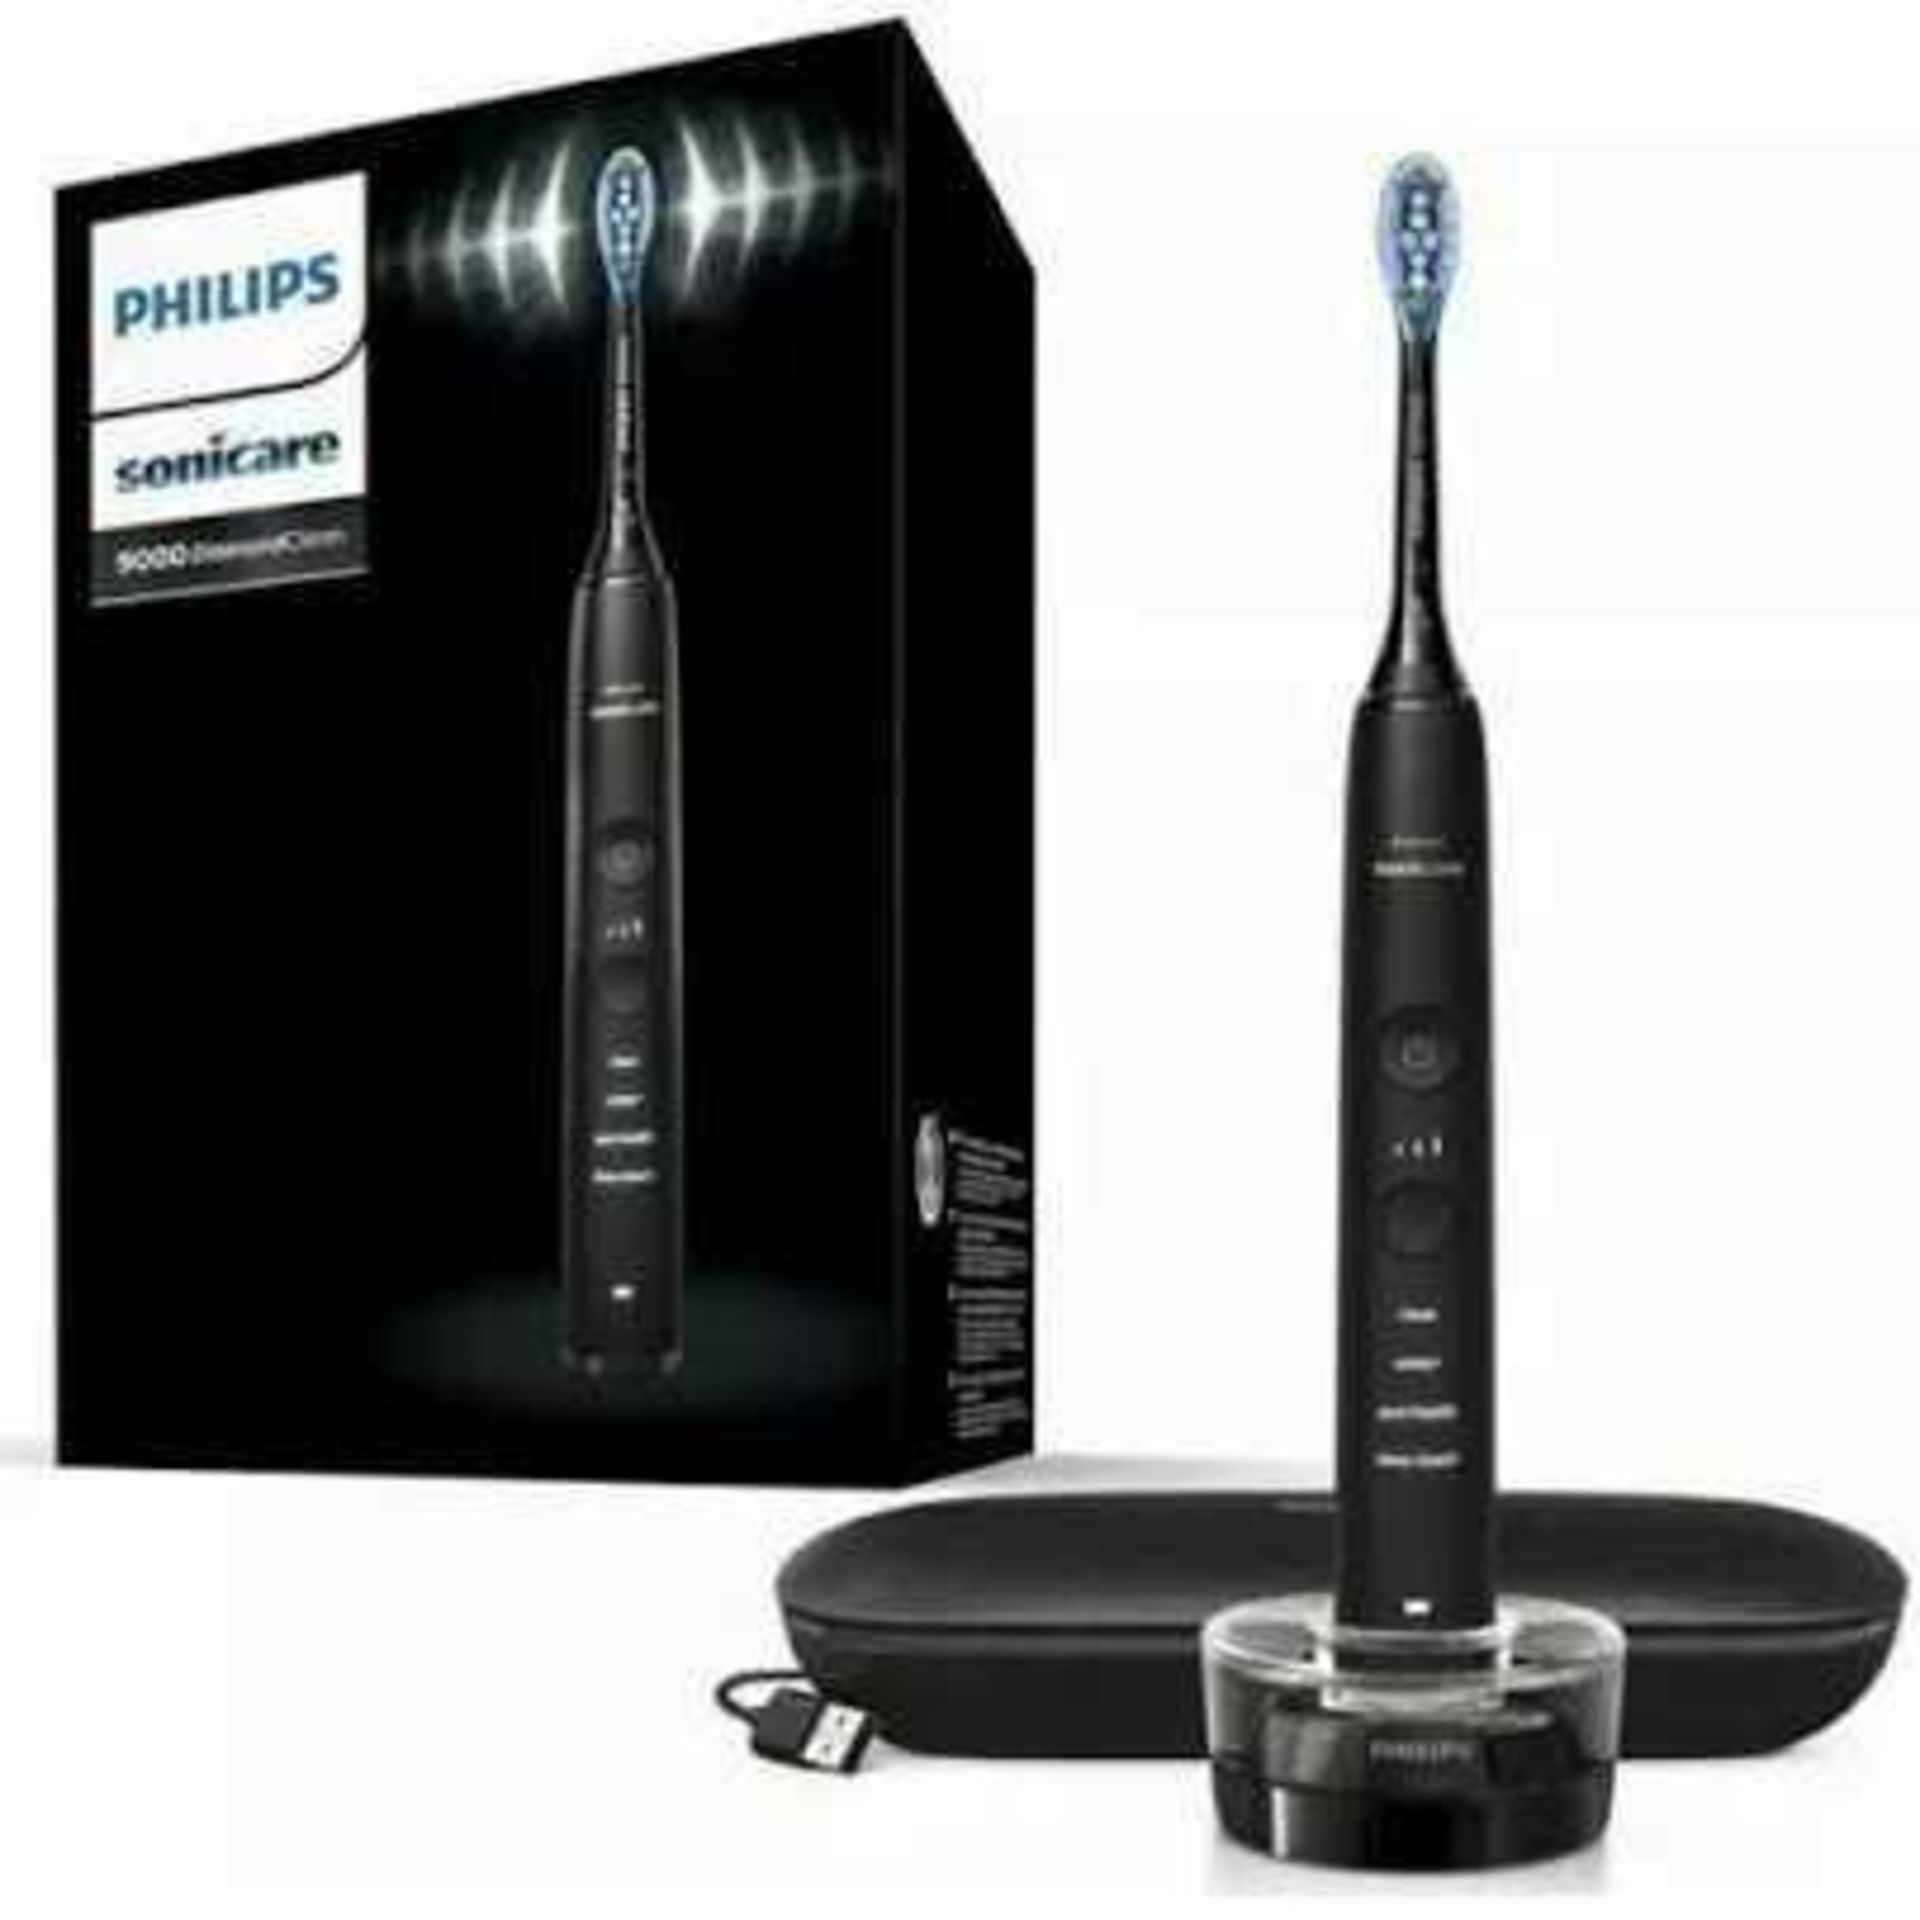 RRP £340 Boxed Phillips Sonicare 9000 Diamond Clean Toothbrush